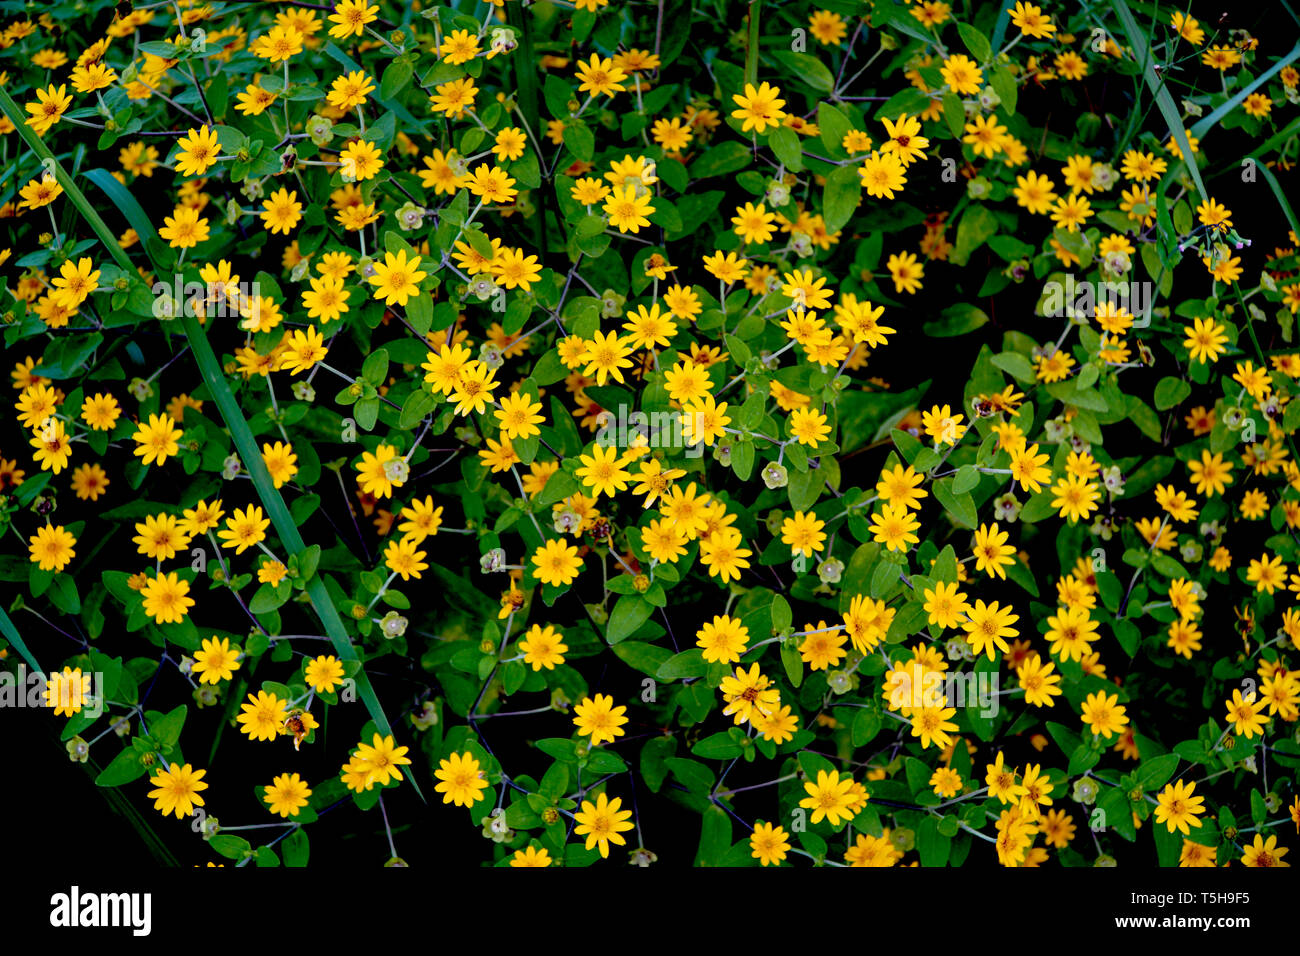 Small yellow flowers, field marigold or Mexican sunflowers Stock Photo